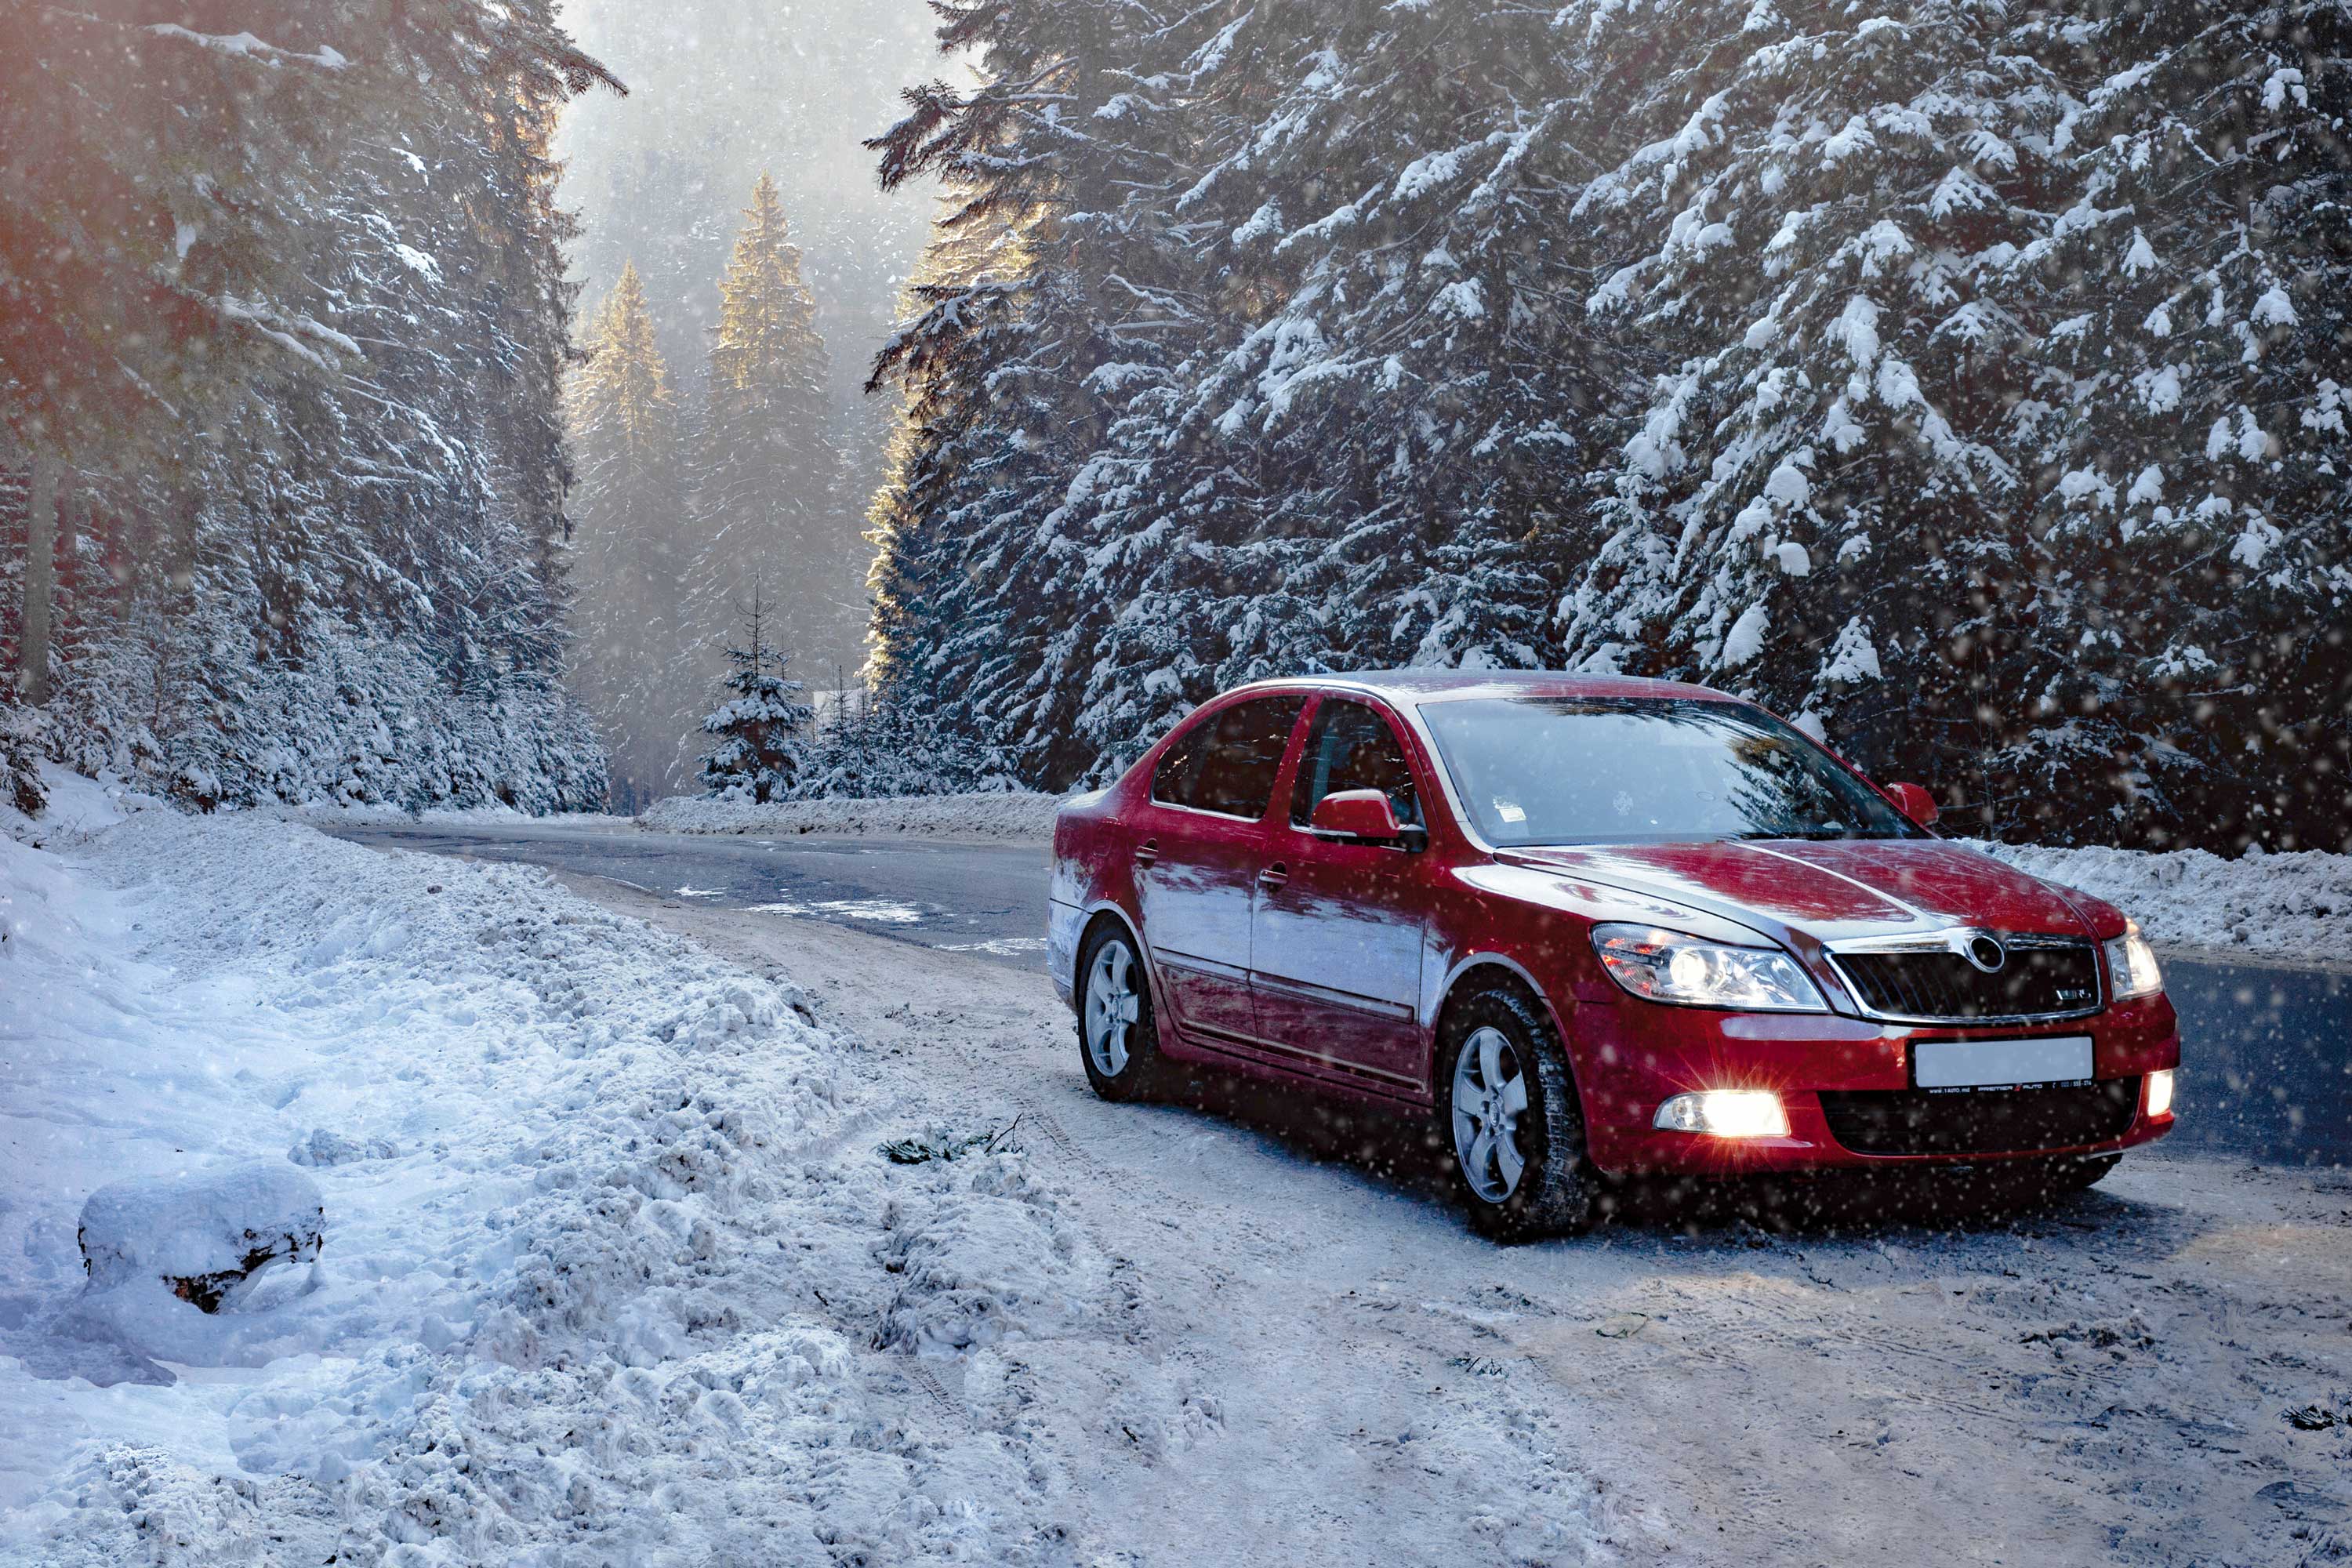 Fearlessly traverse the ice and snow.